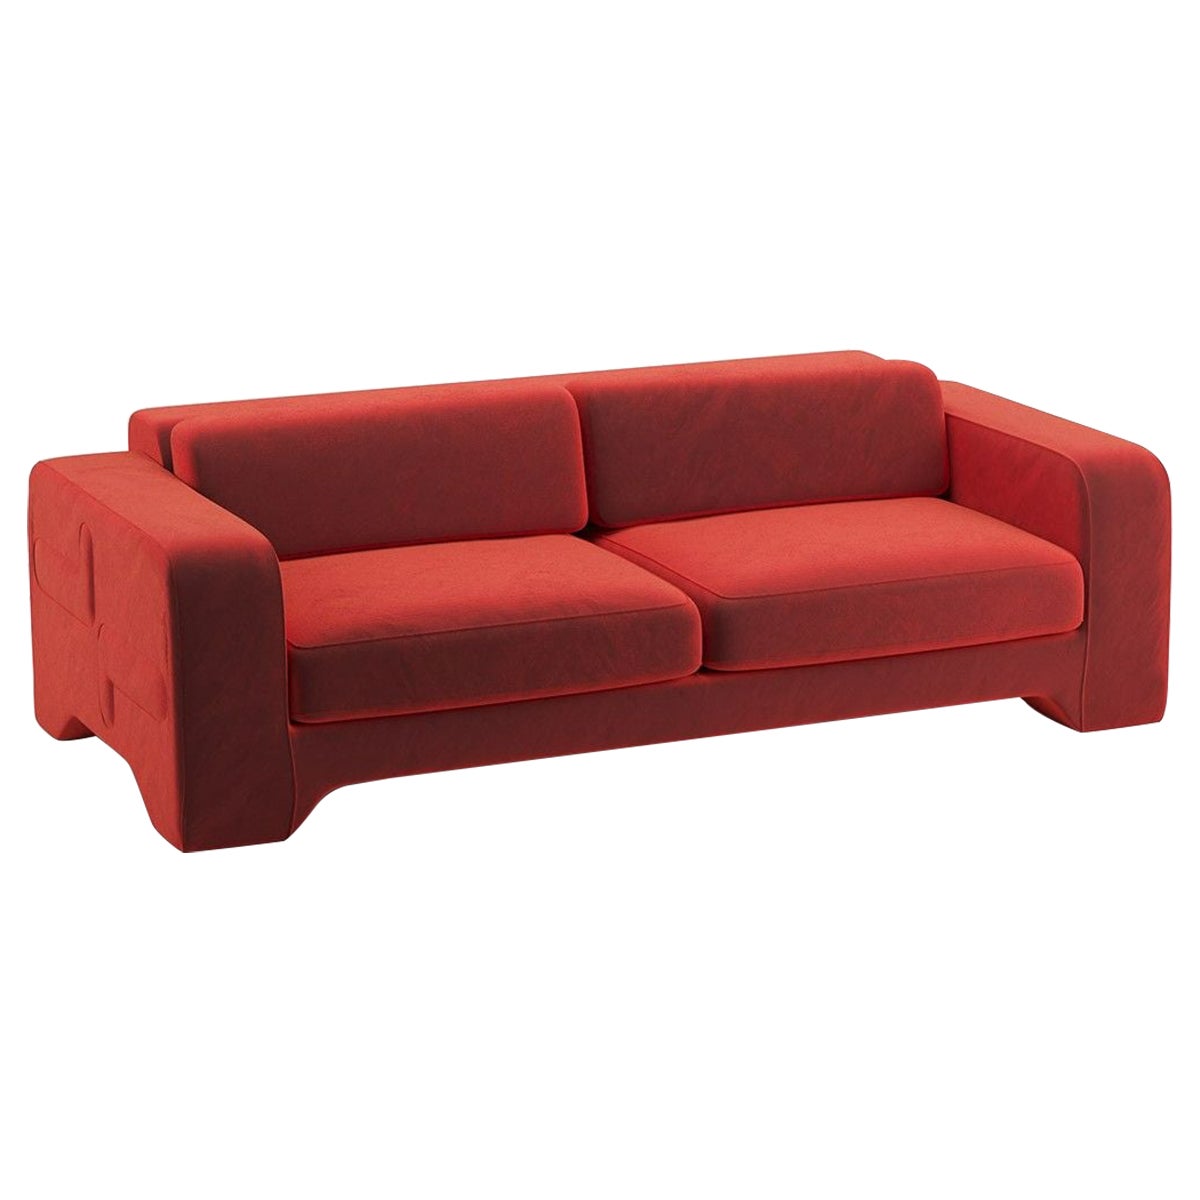 Popus Editions Giovanna 3 Seater Sofa in Vermilion Como Velvet Upholstery